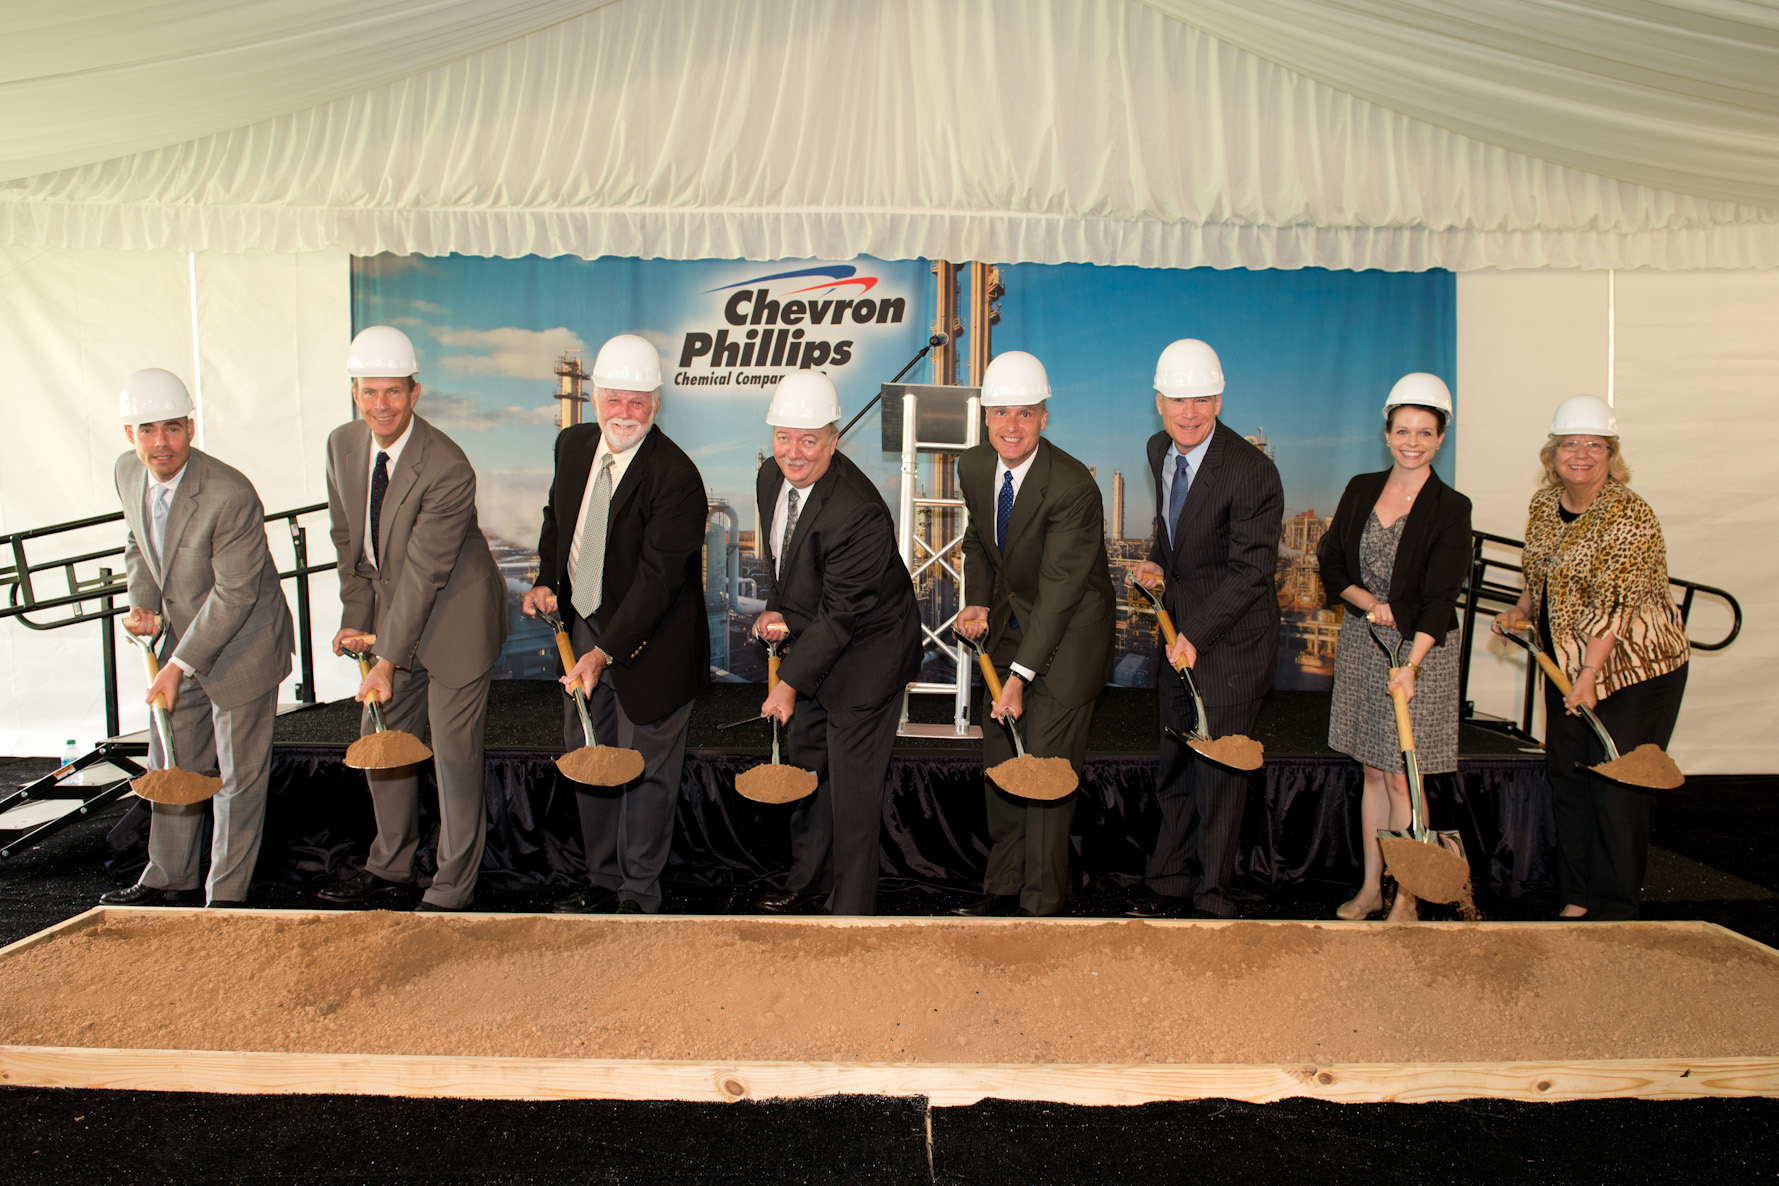  Chevron Phillips Chemical Breaks Ground on Two World-Scale Polyethylene Units for U.S. Gulf Coast Petrochemicals Project